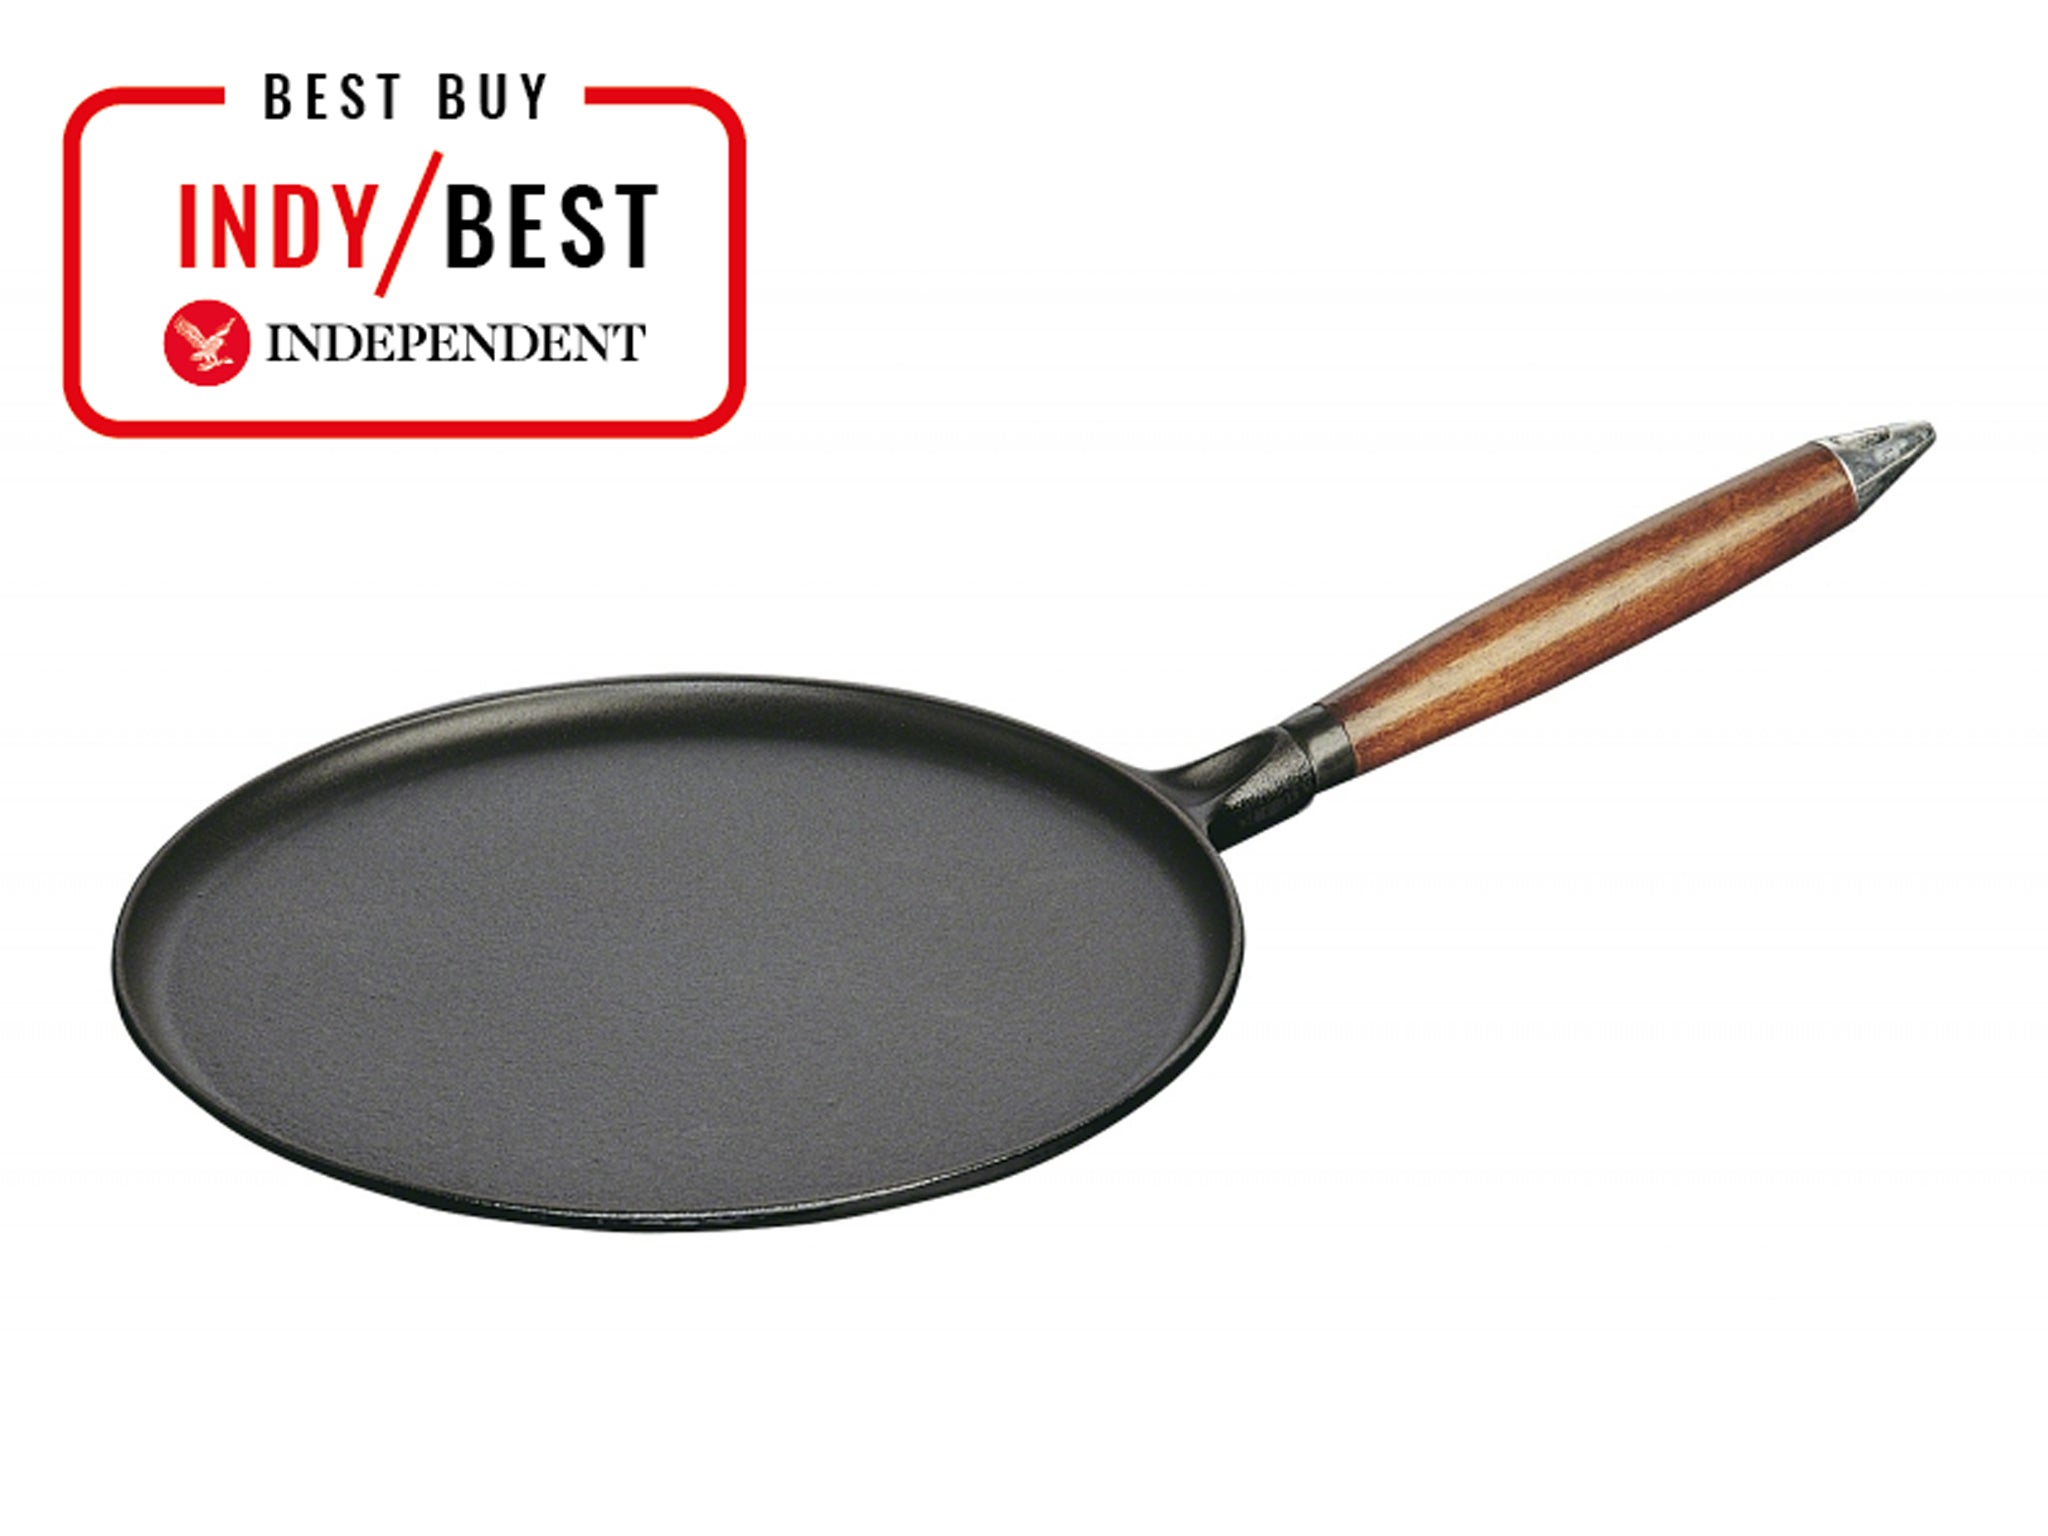 https://static.independent.co.uk/2021/02/08/10/Staub%20cast%20iron%20pancake%20pan%20with%20wooden%20handle%2028cm-1.jpg